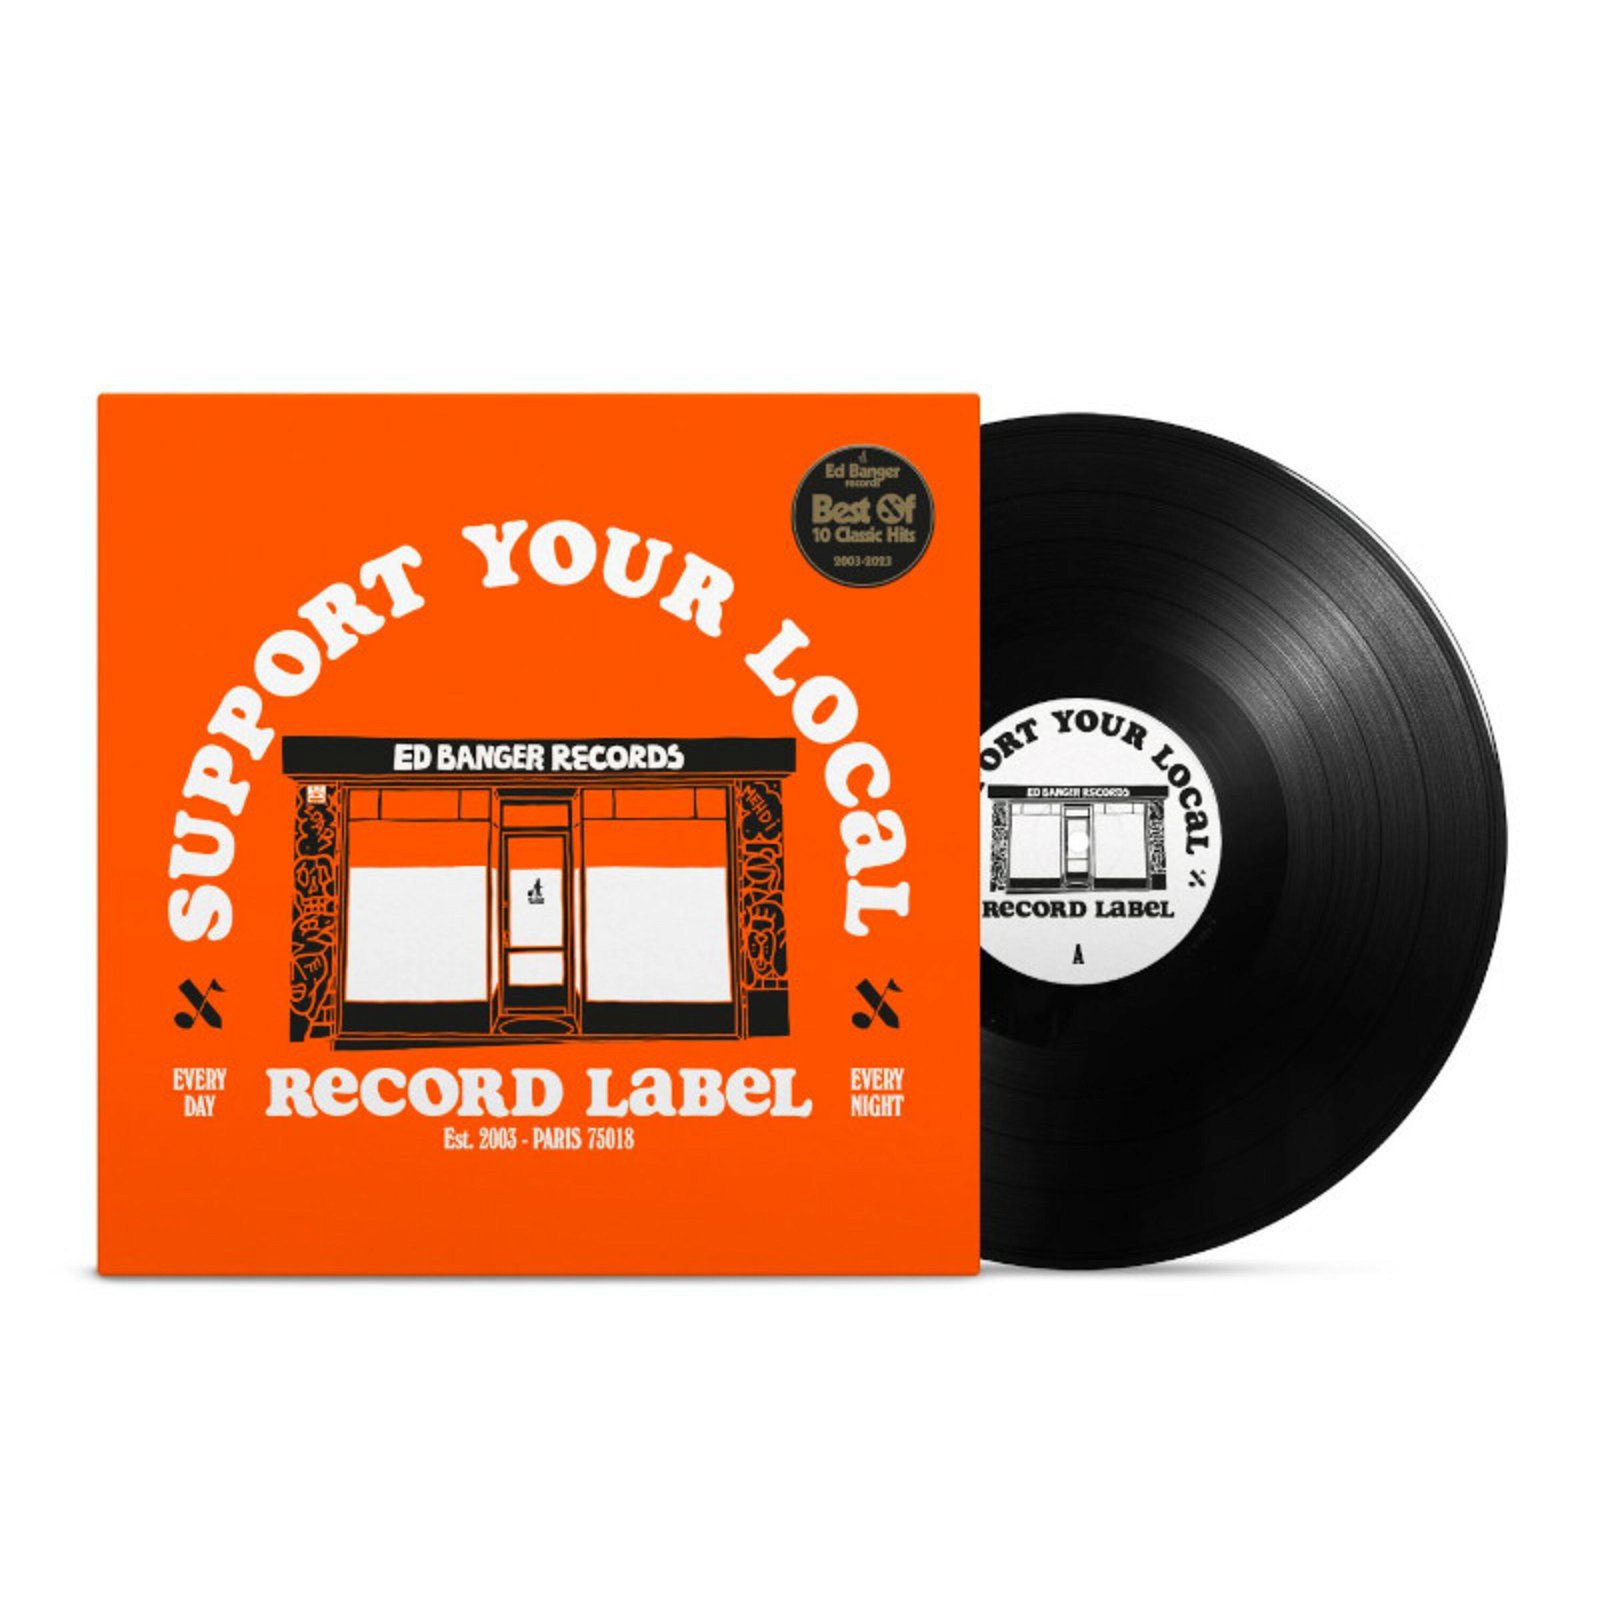 CD Shop - V/A SUPPORT YOUR LOCAL RECORD LABEL (BEST OF ED BANGER RECORDS)